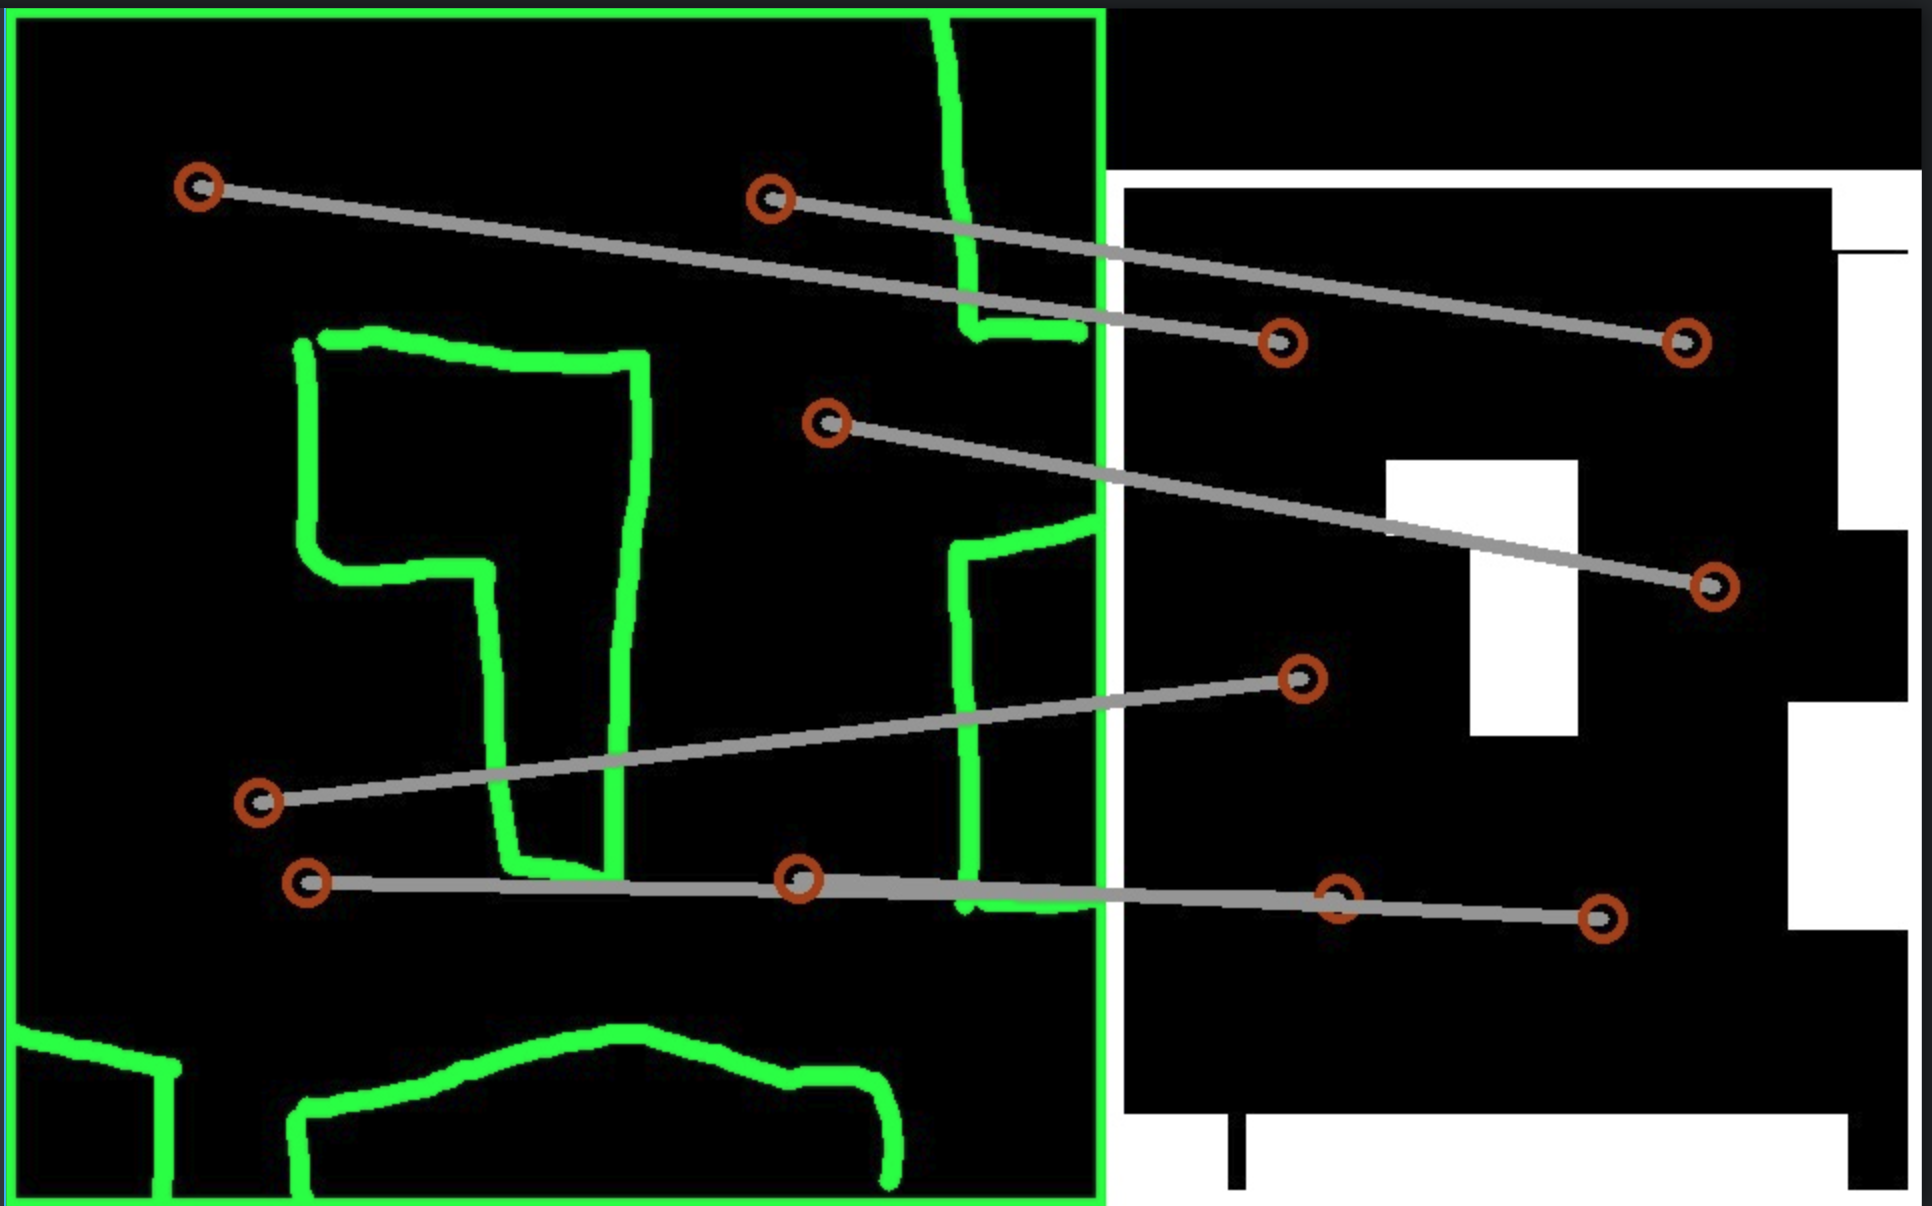 Key places of a sketch map, on the left, are linked to the equivalent places in the model map, on the right.